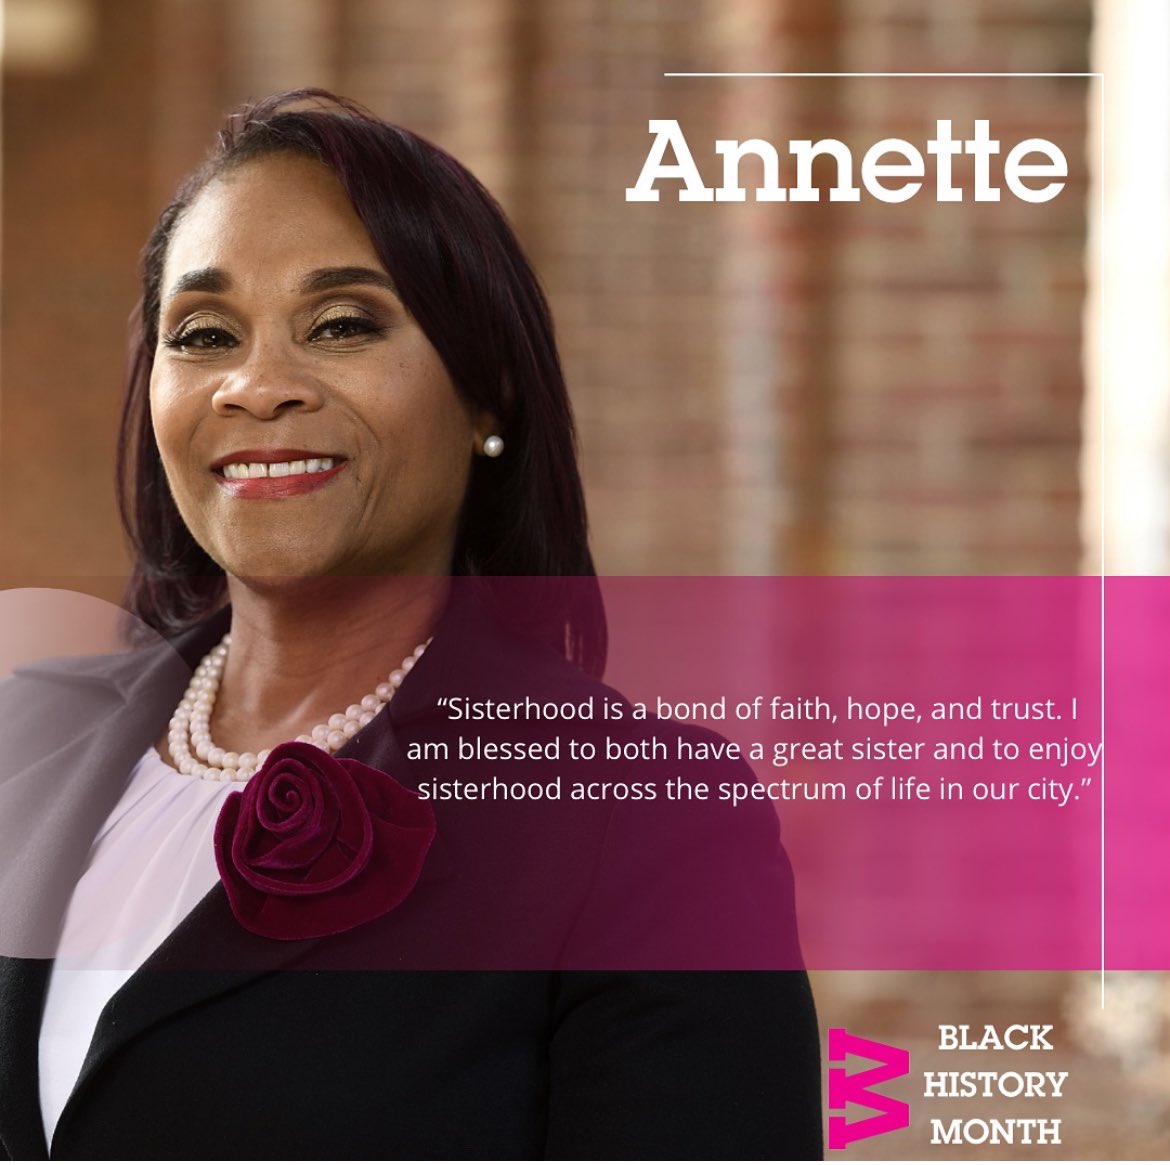 Thank you so much to @women_leading for this incredible honor to be recognized for serving in Baltimore, the beloved city that raised me and made me.❤️ #LiftAsWeClimb #WomenLeadingBaltimore
#BlackHistoryMonth #grateful